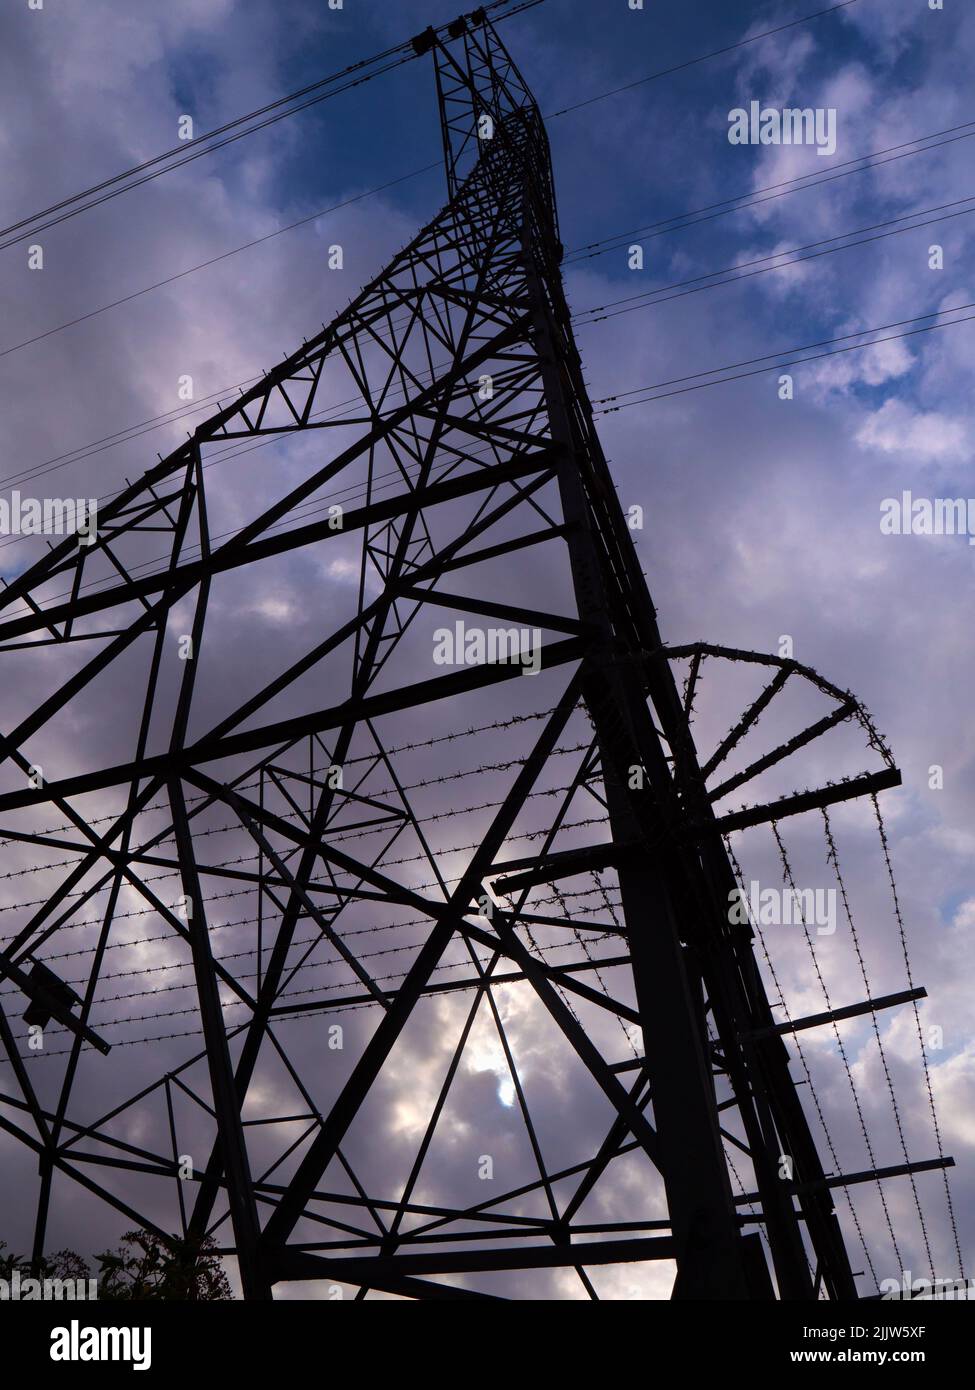 I love electricity pylons; I find their abstract, gaunt shapes endlessly fascinating. Here we are looking up at a giant pylon in a field in Radley Vil Stock Photo